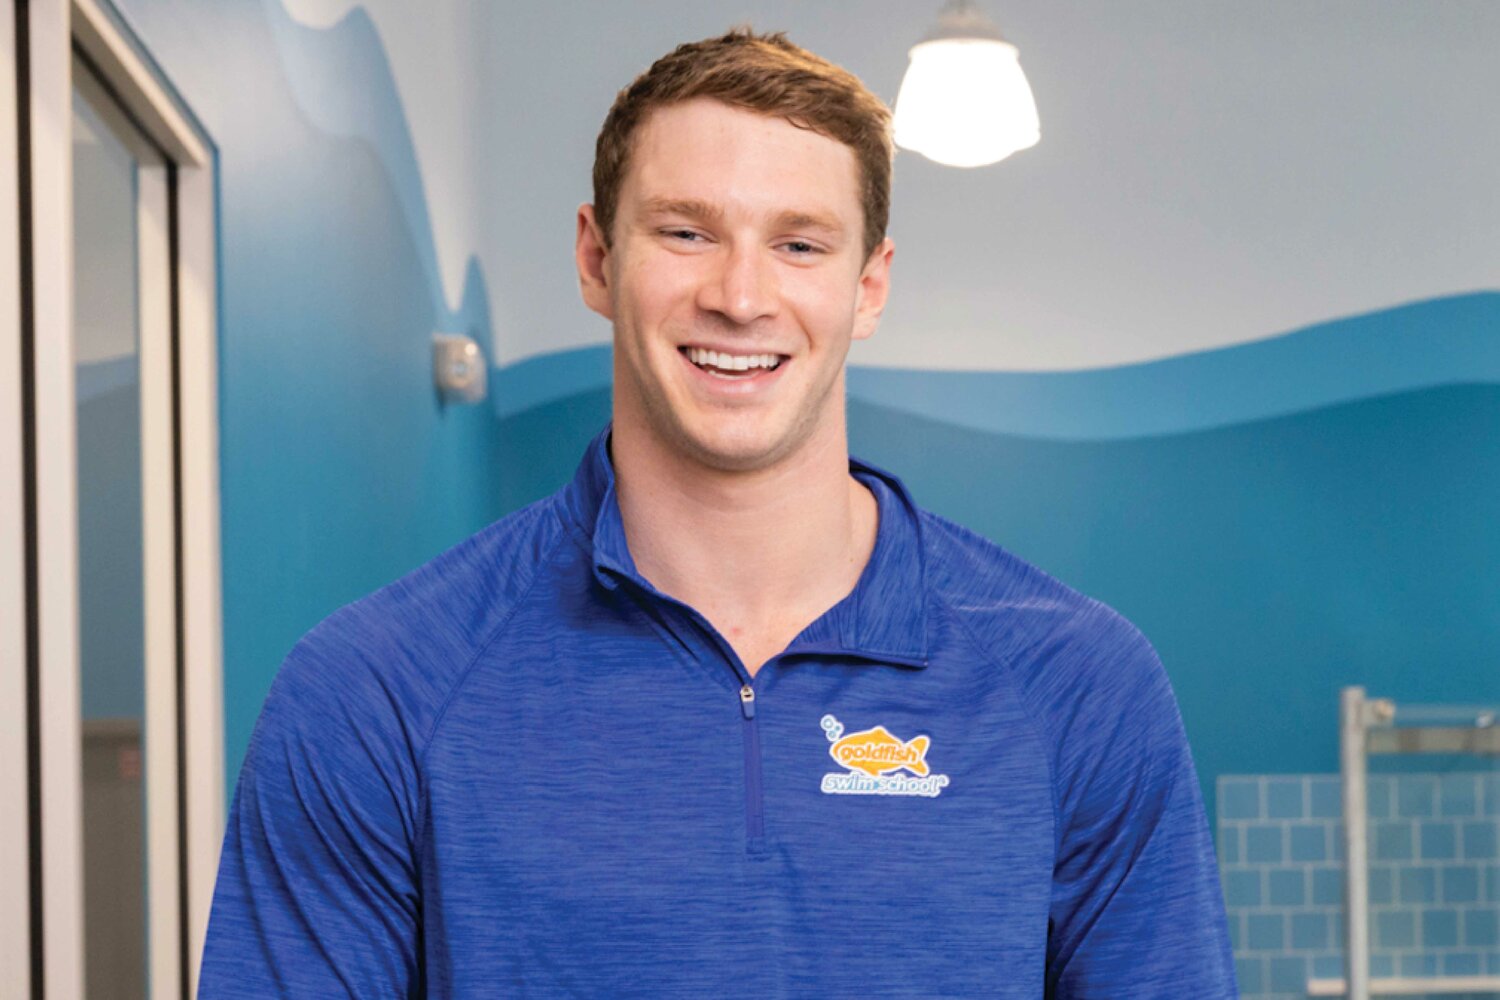 Olympic gold medalist Ryan Murphy grew up in Ponte Vedra and announced plans to partner with Goldfish Swim School and open a facility in St. Johns in the spring of 2024.